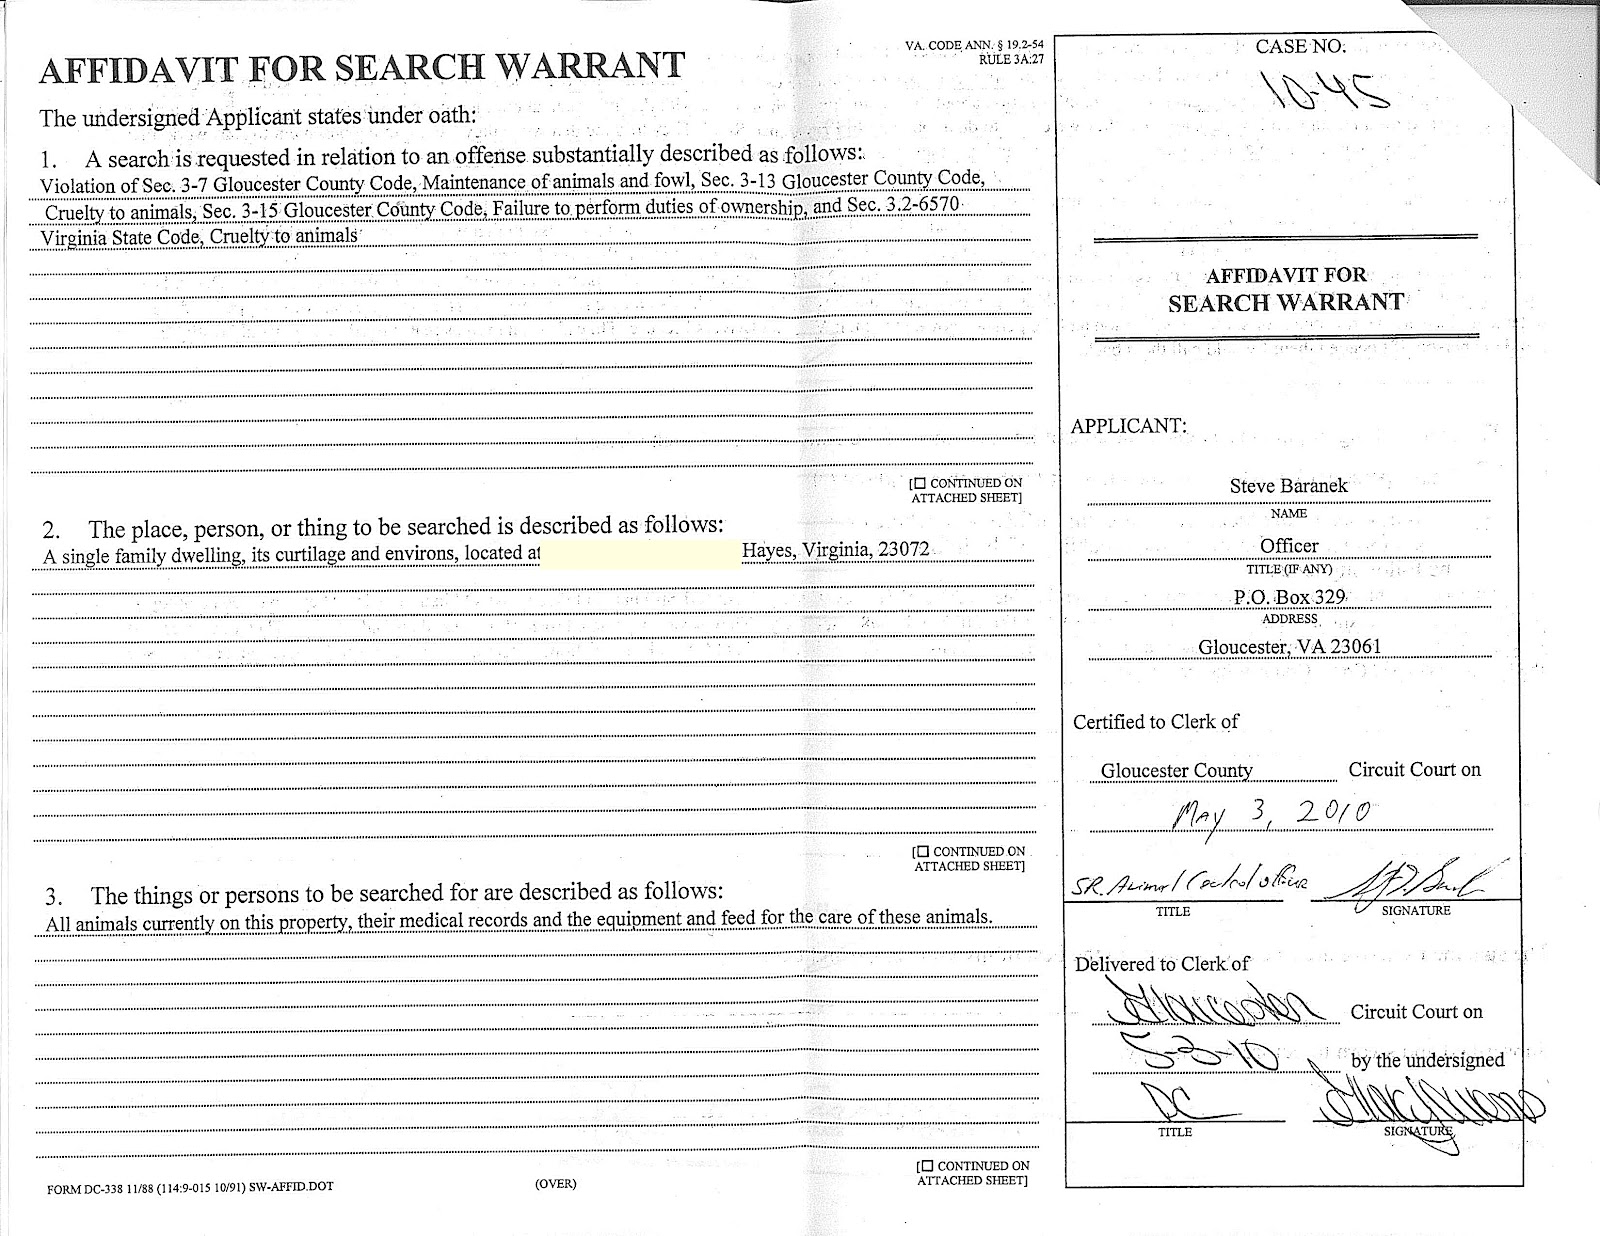 Gloucester VA Links and News: Evidence Released Of Fake Search Warrant